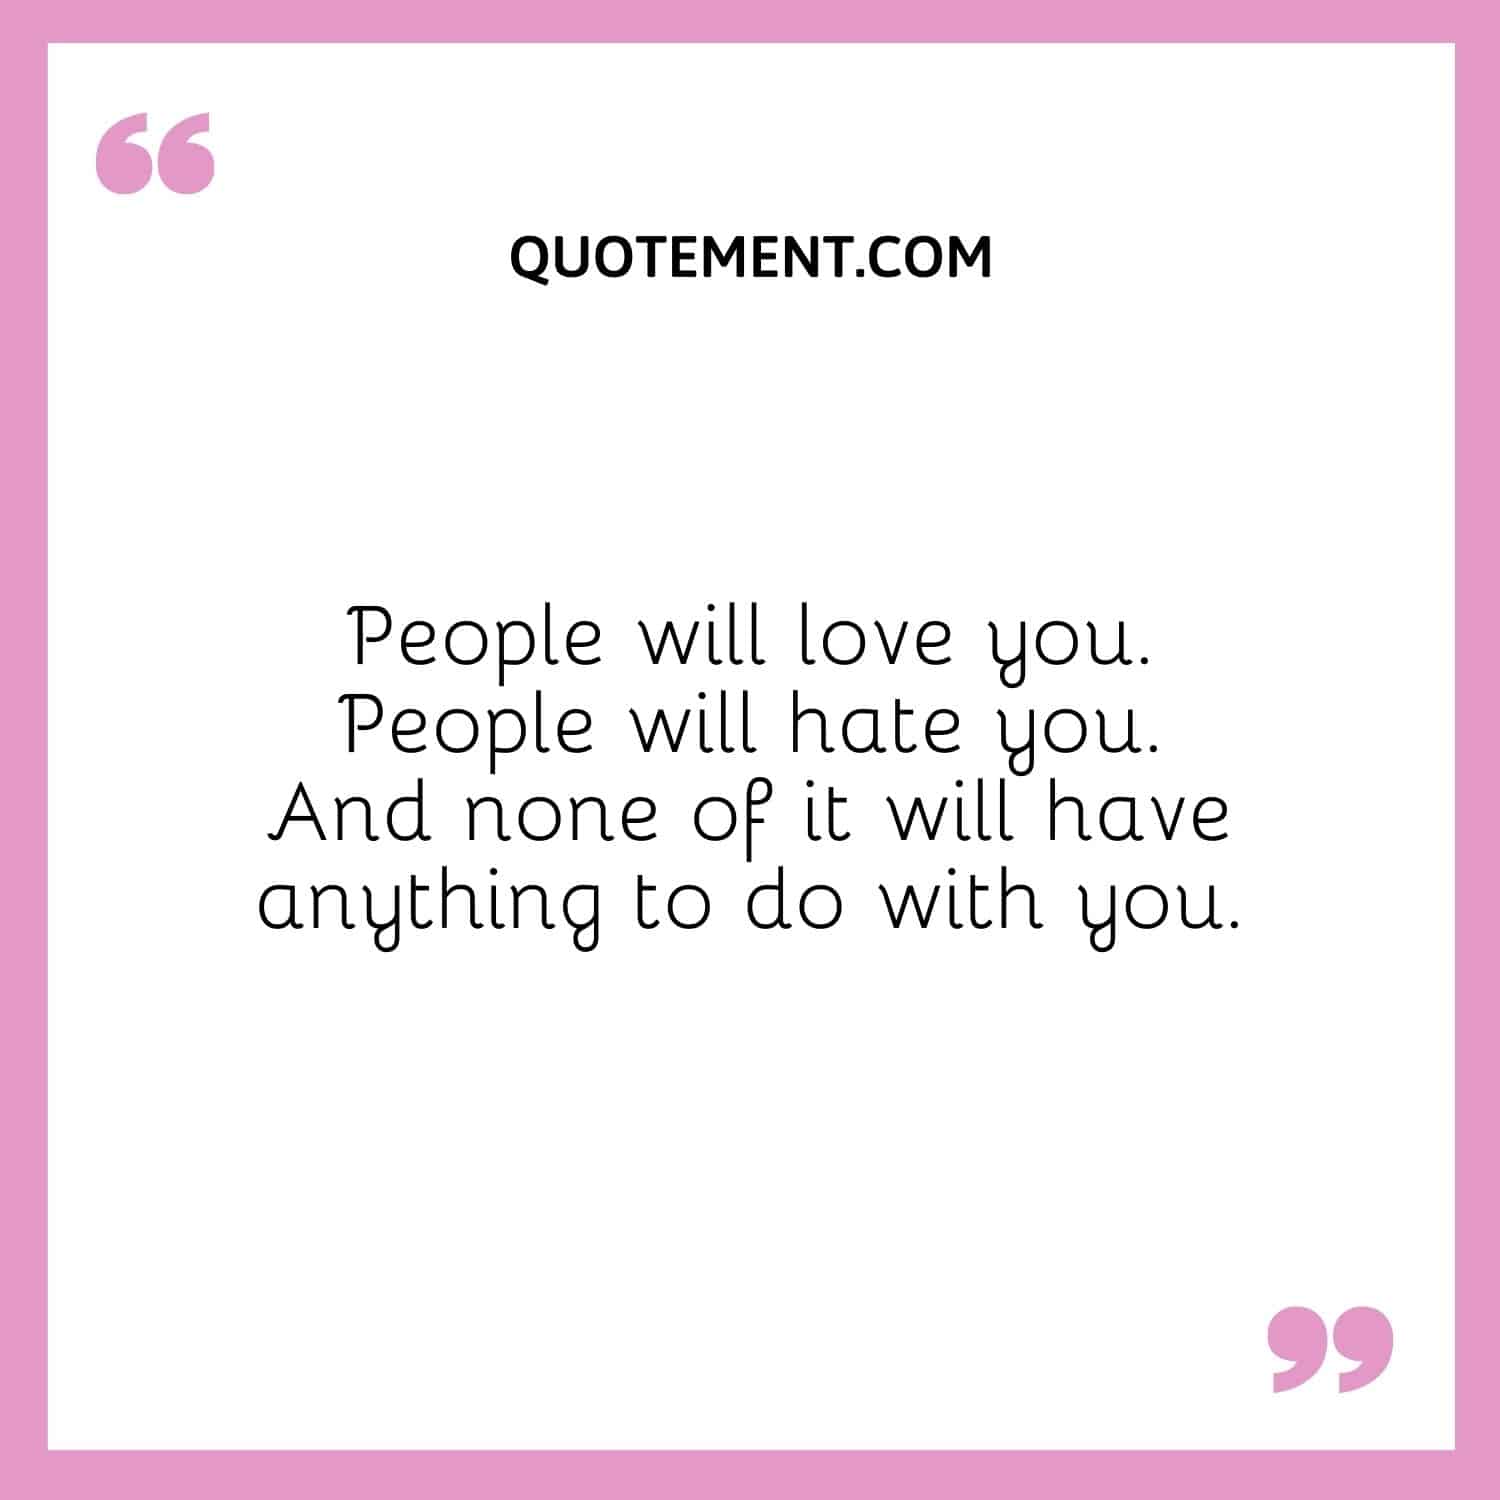 People will love you. People will hate you. And none of it will have anything to do with you.